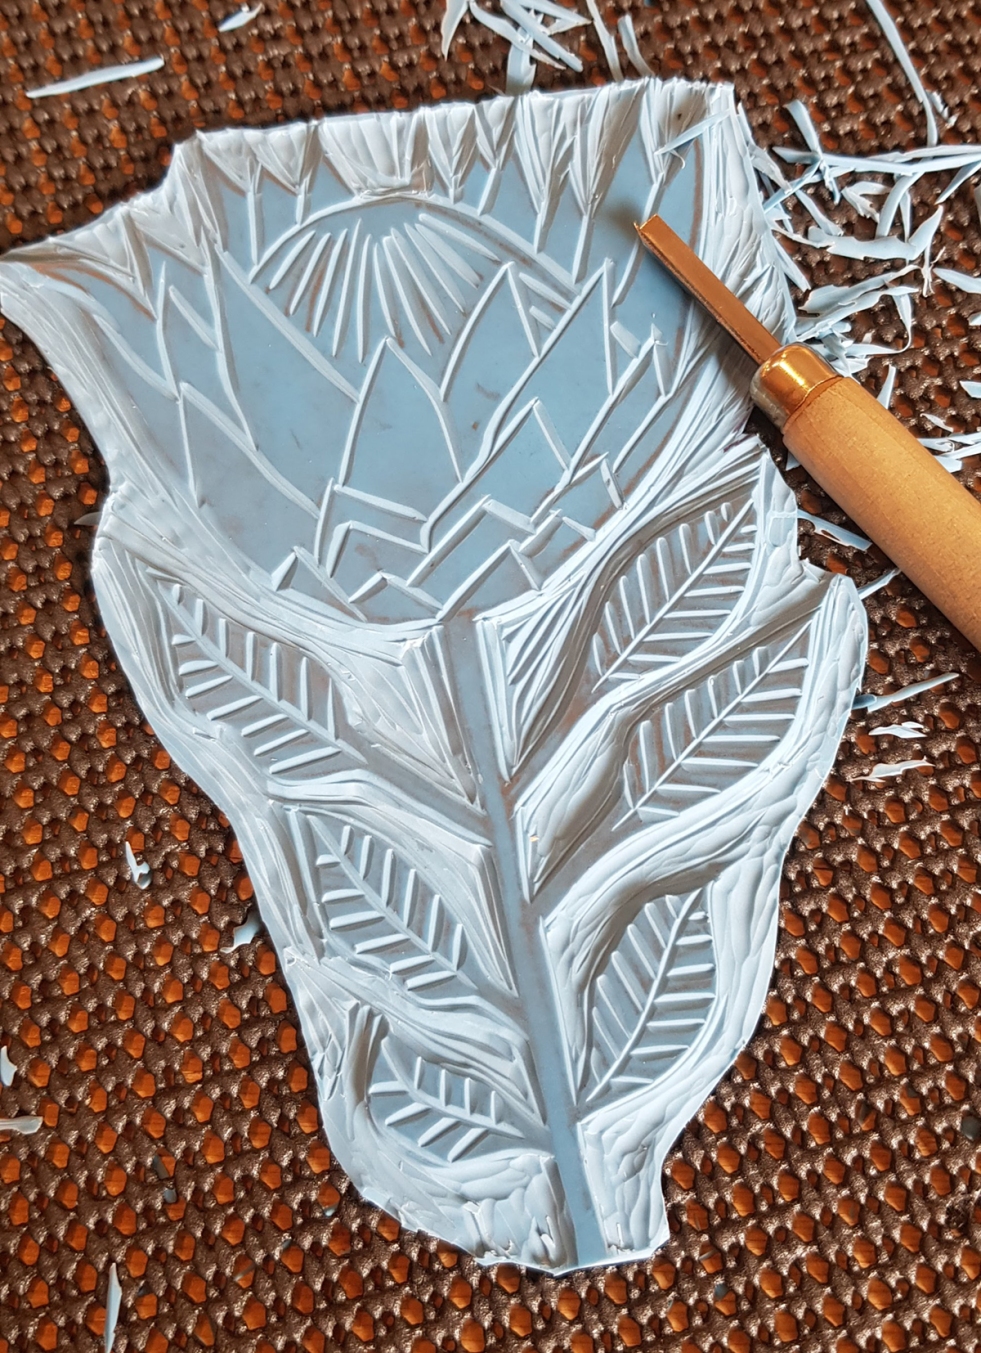 Lino printing block with a protea flower